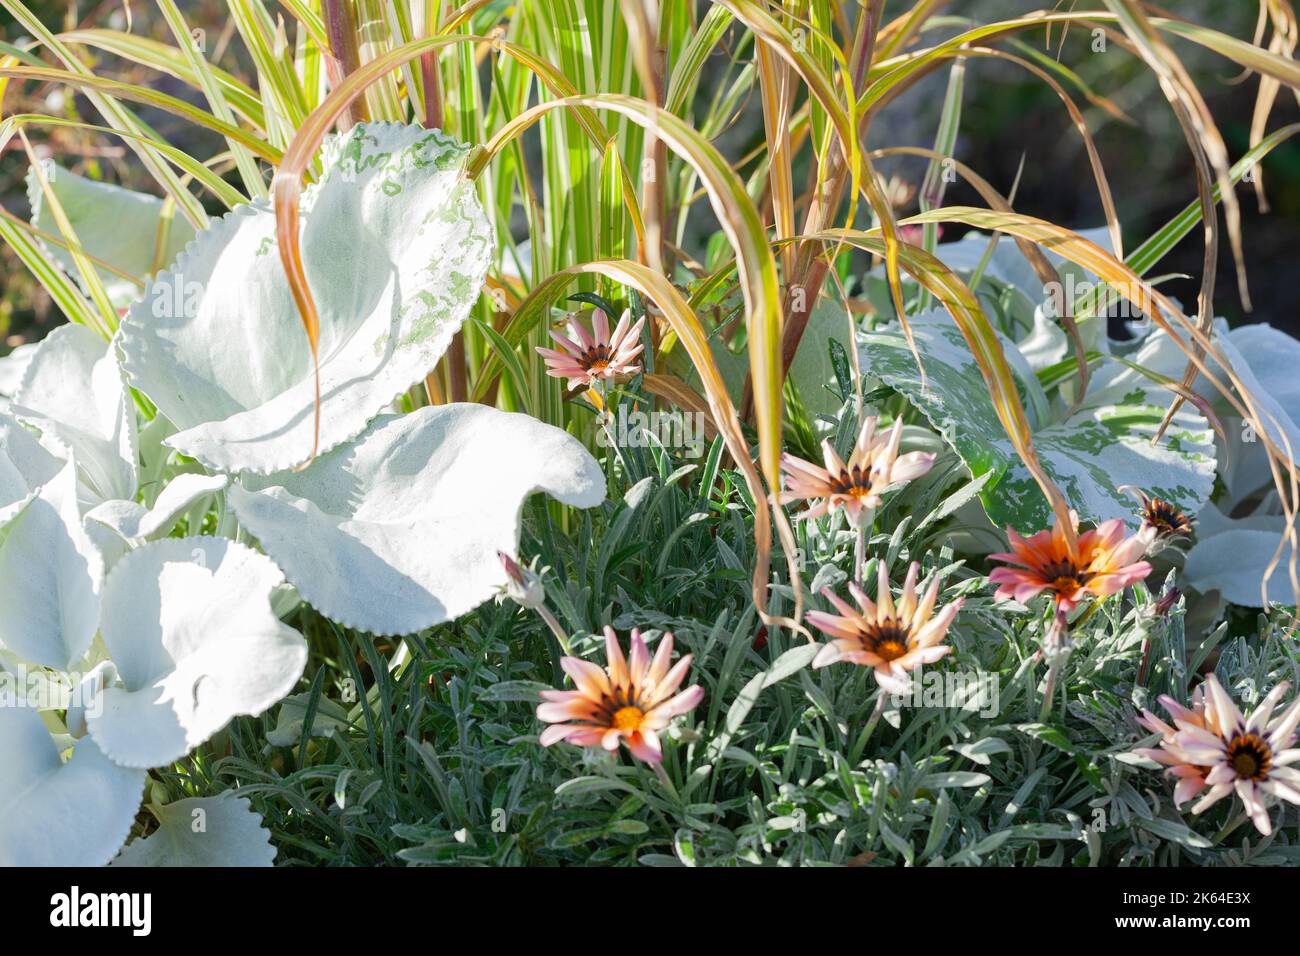 Garden Designs - Close-up of a variety of beautiful container plants growing in an Essex Garden. Stock Photo